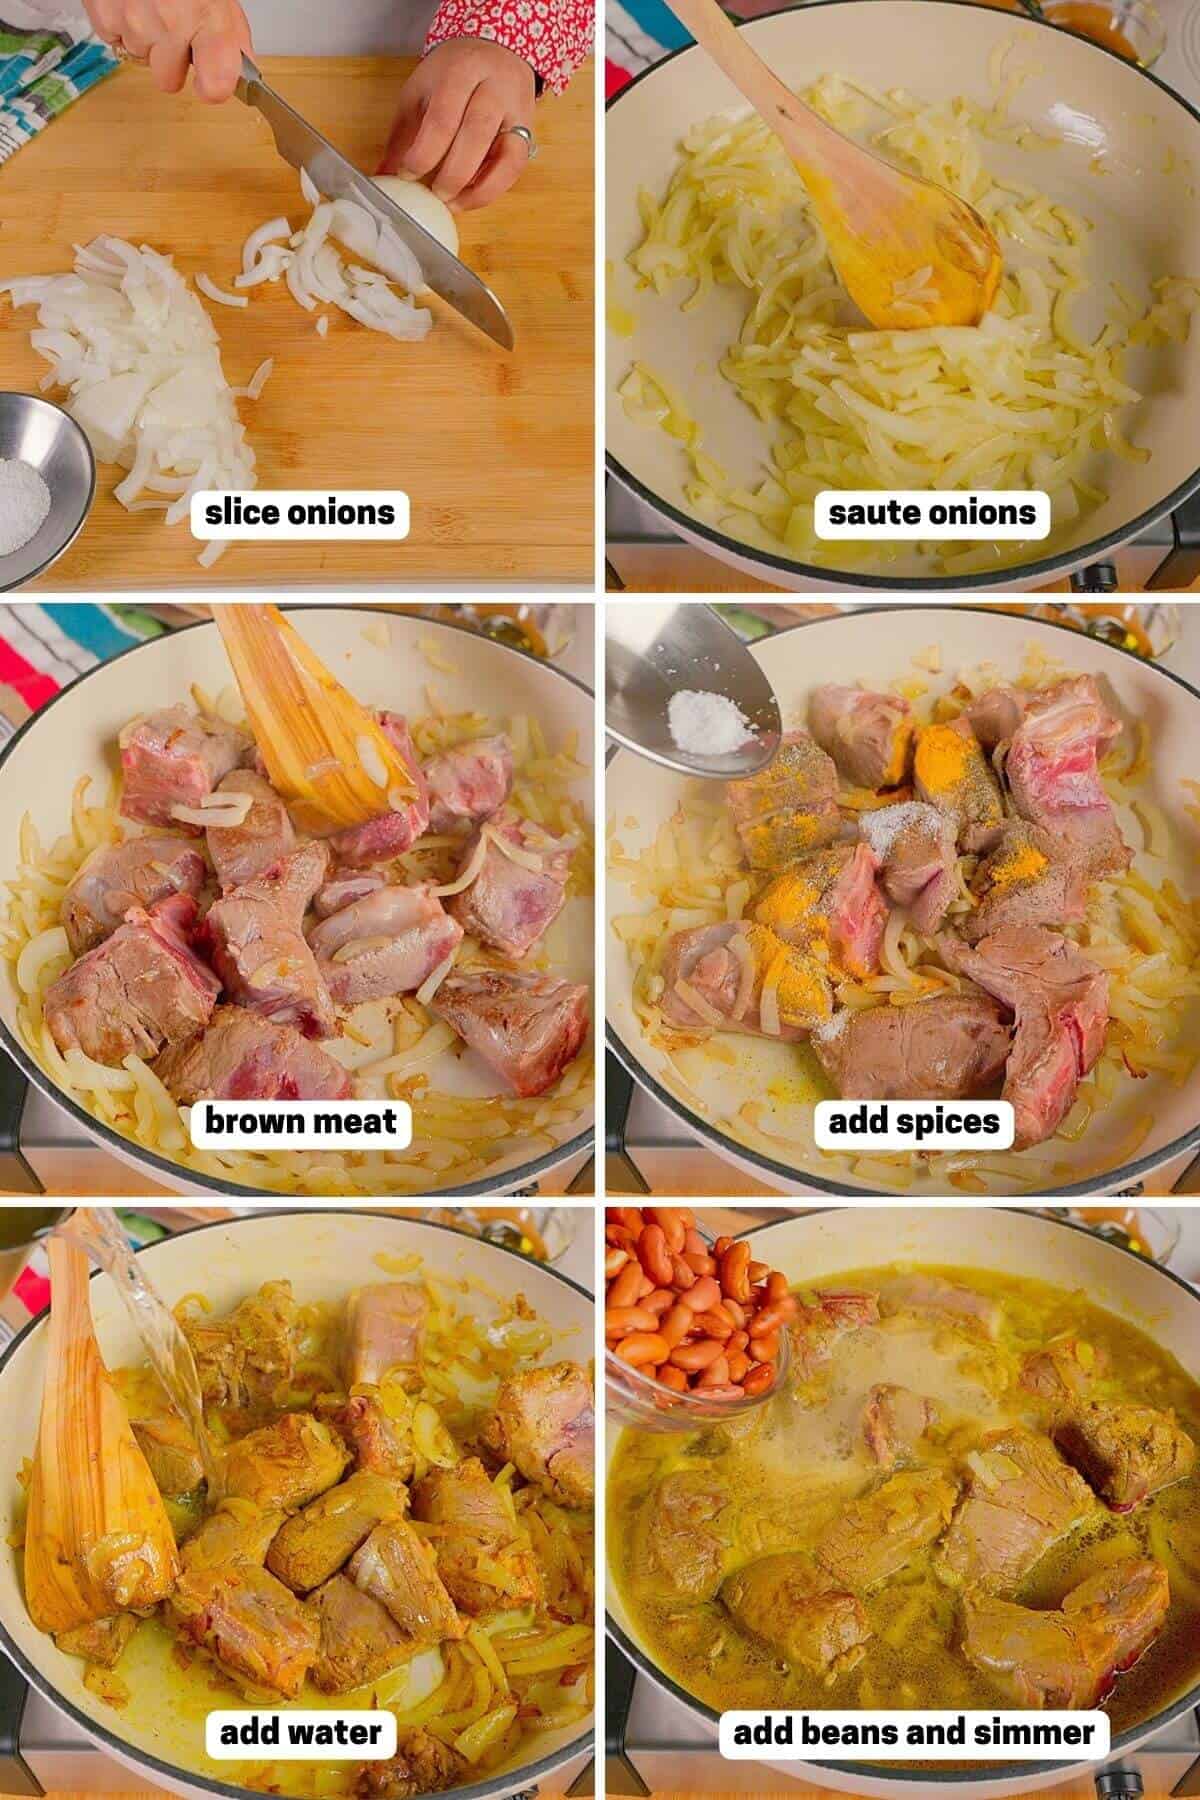 Steps for making the meat stew.